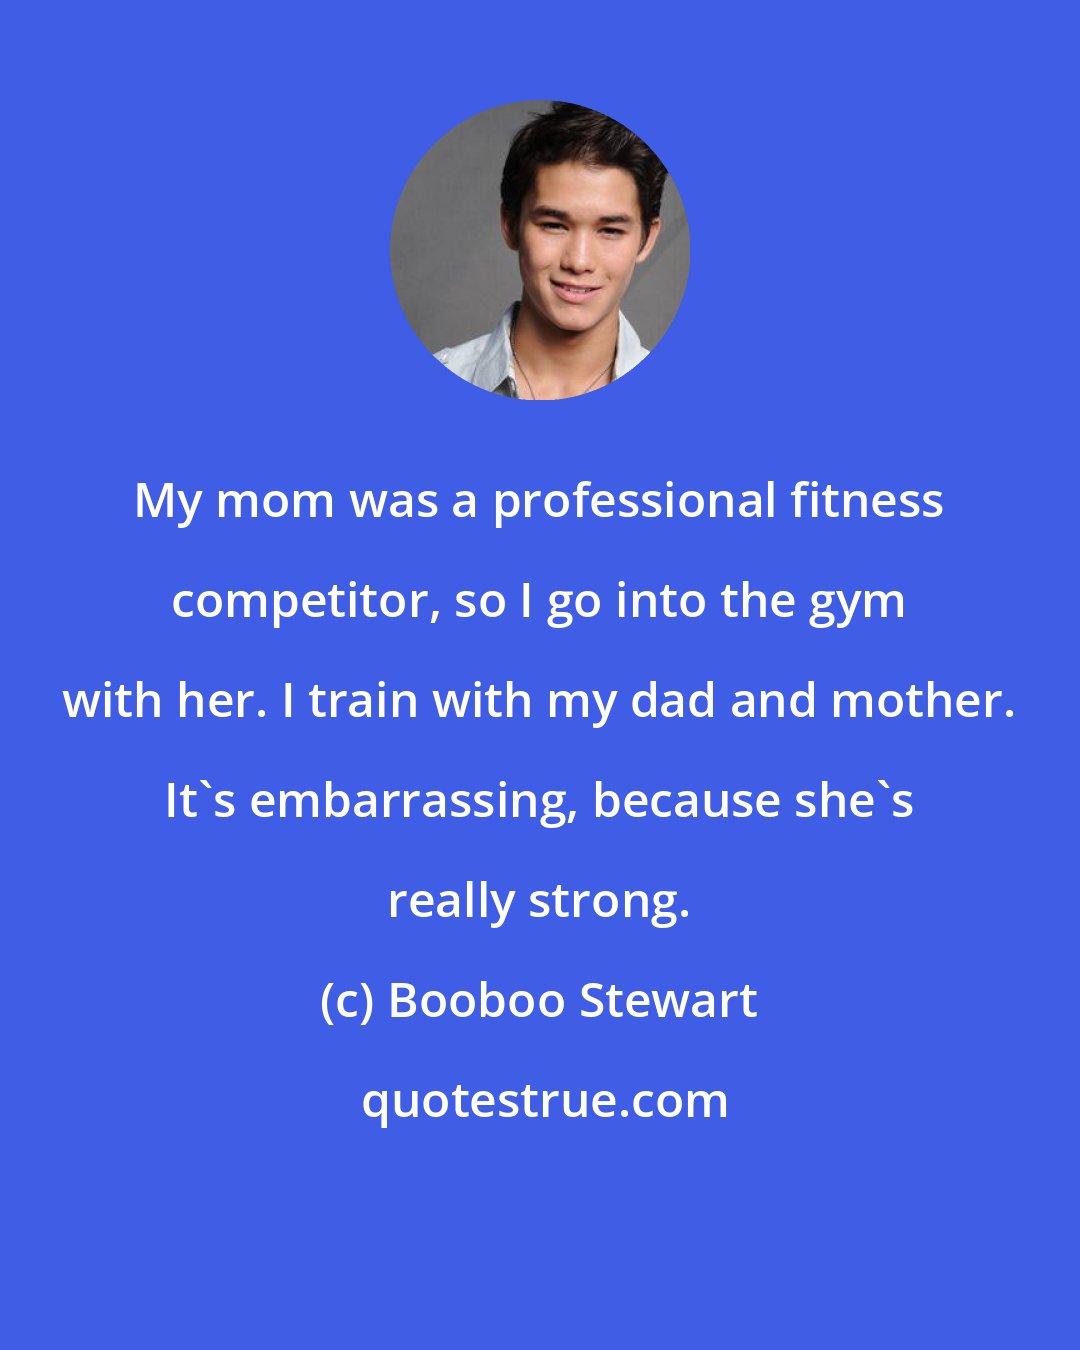 Booboo Stewart: My mom was a professional fitness competitor, so I go into the gym with her. I train with my dad and mother. It's embarrassing, because she's really strong.